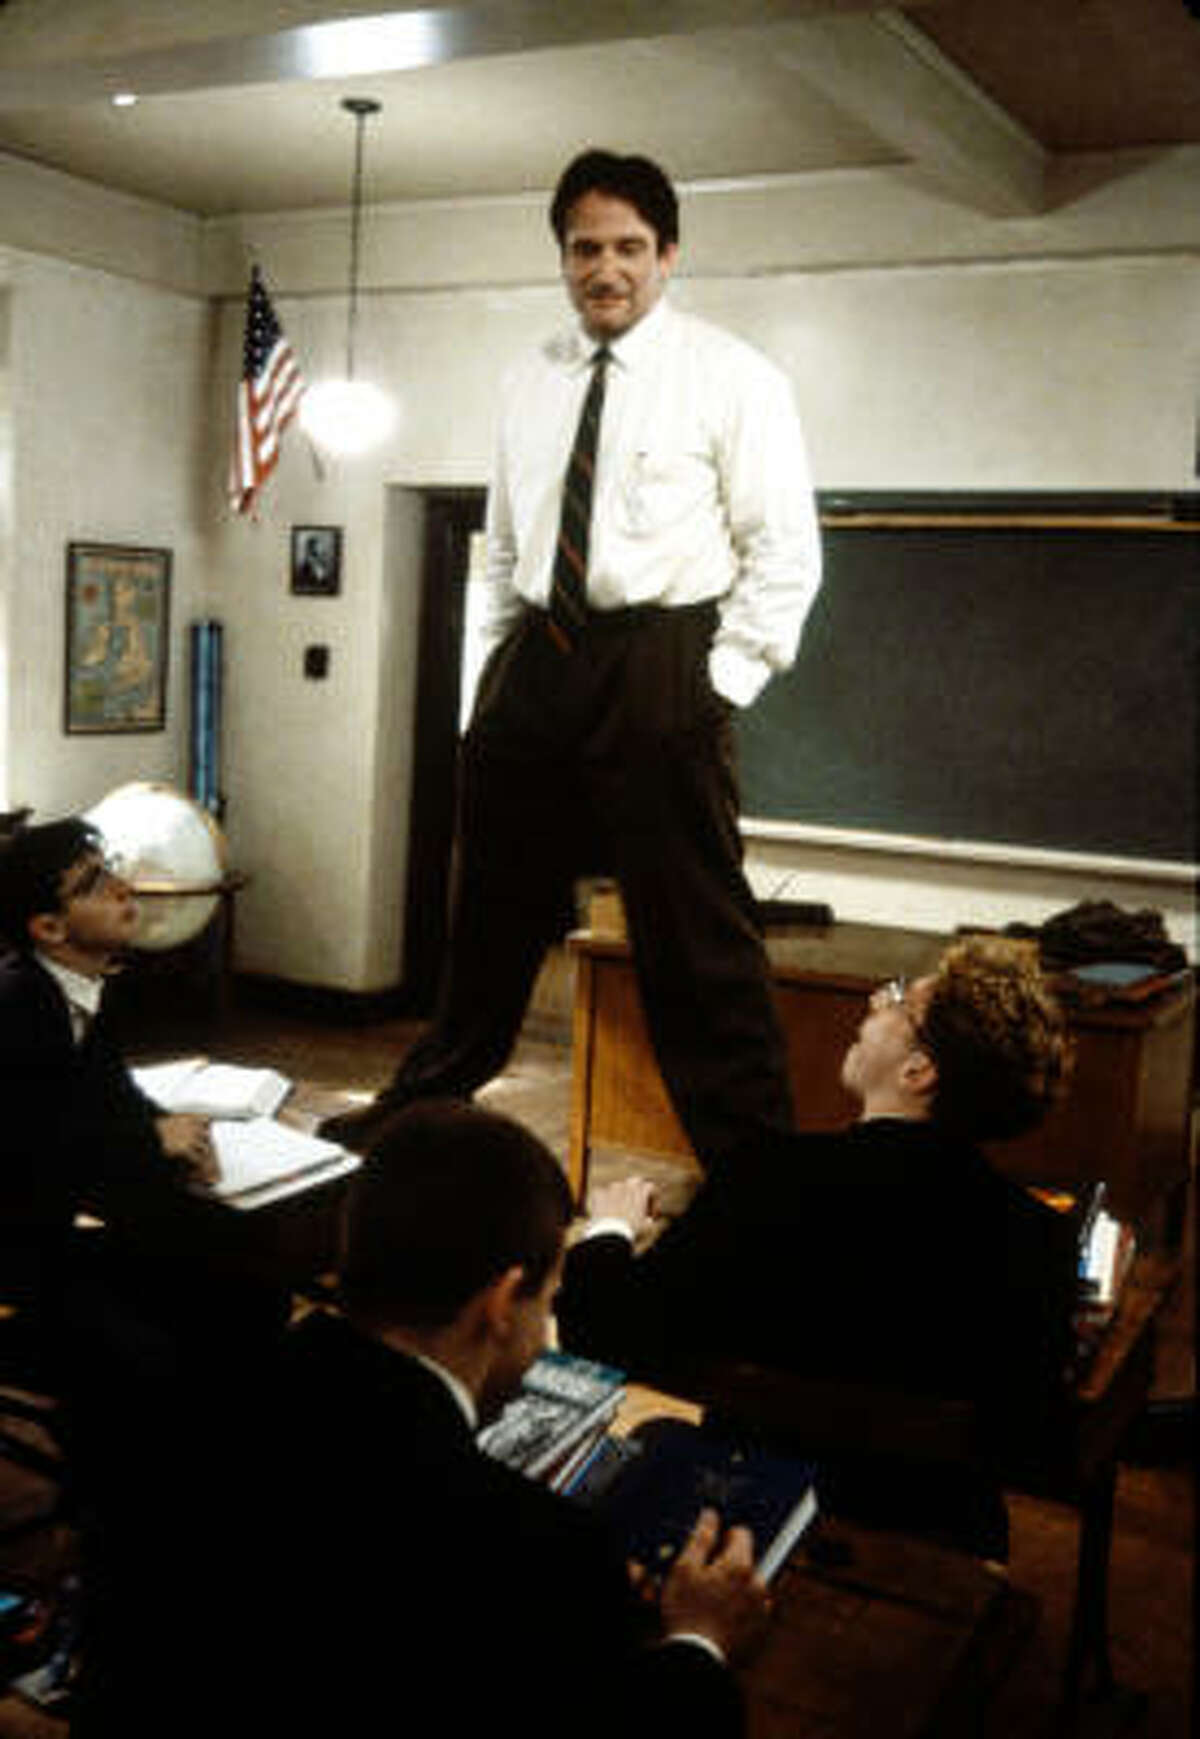 Dead Poets Society (1989) Leaving Netflix Sept. 1 Robin Williams portrays teacher John Keating, who tries to get his English class to look at their studies from different perspectives. 